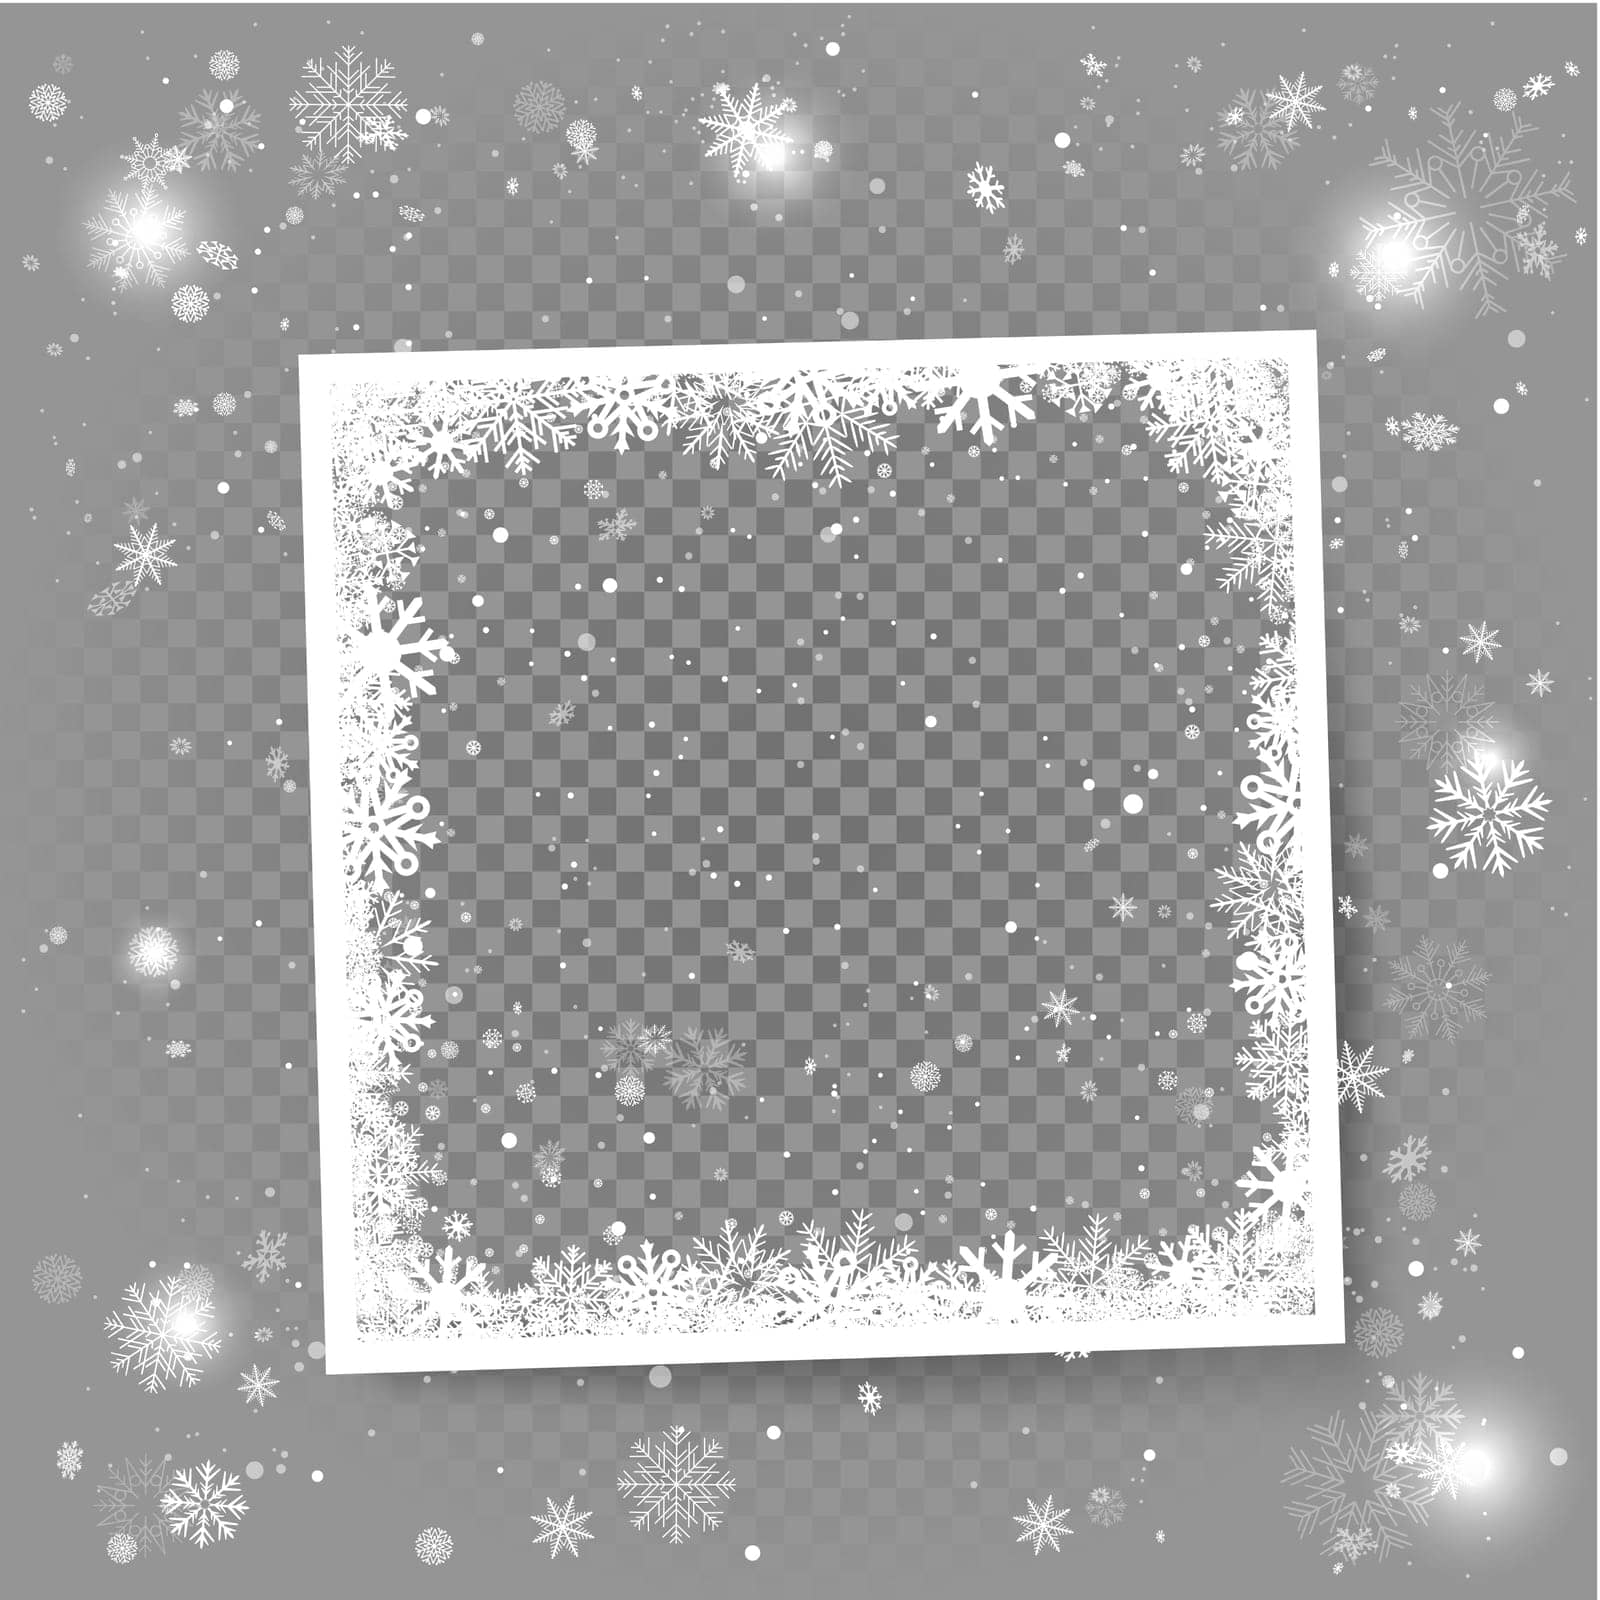 Christmas winter photo frame template with snow and shadow. Winter Holiday snowfall season snapshot background. Seasonal picture decoration backdrop